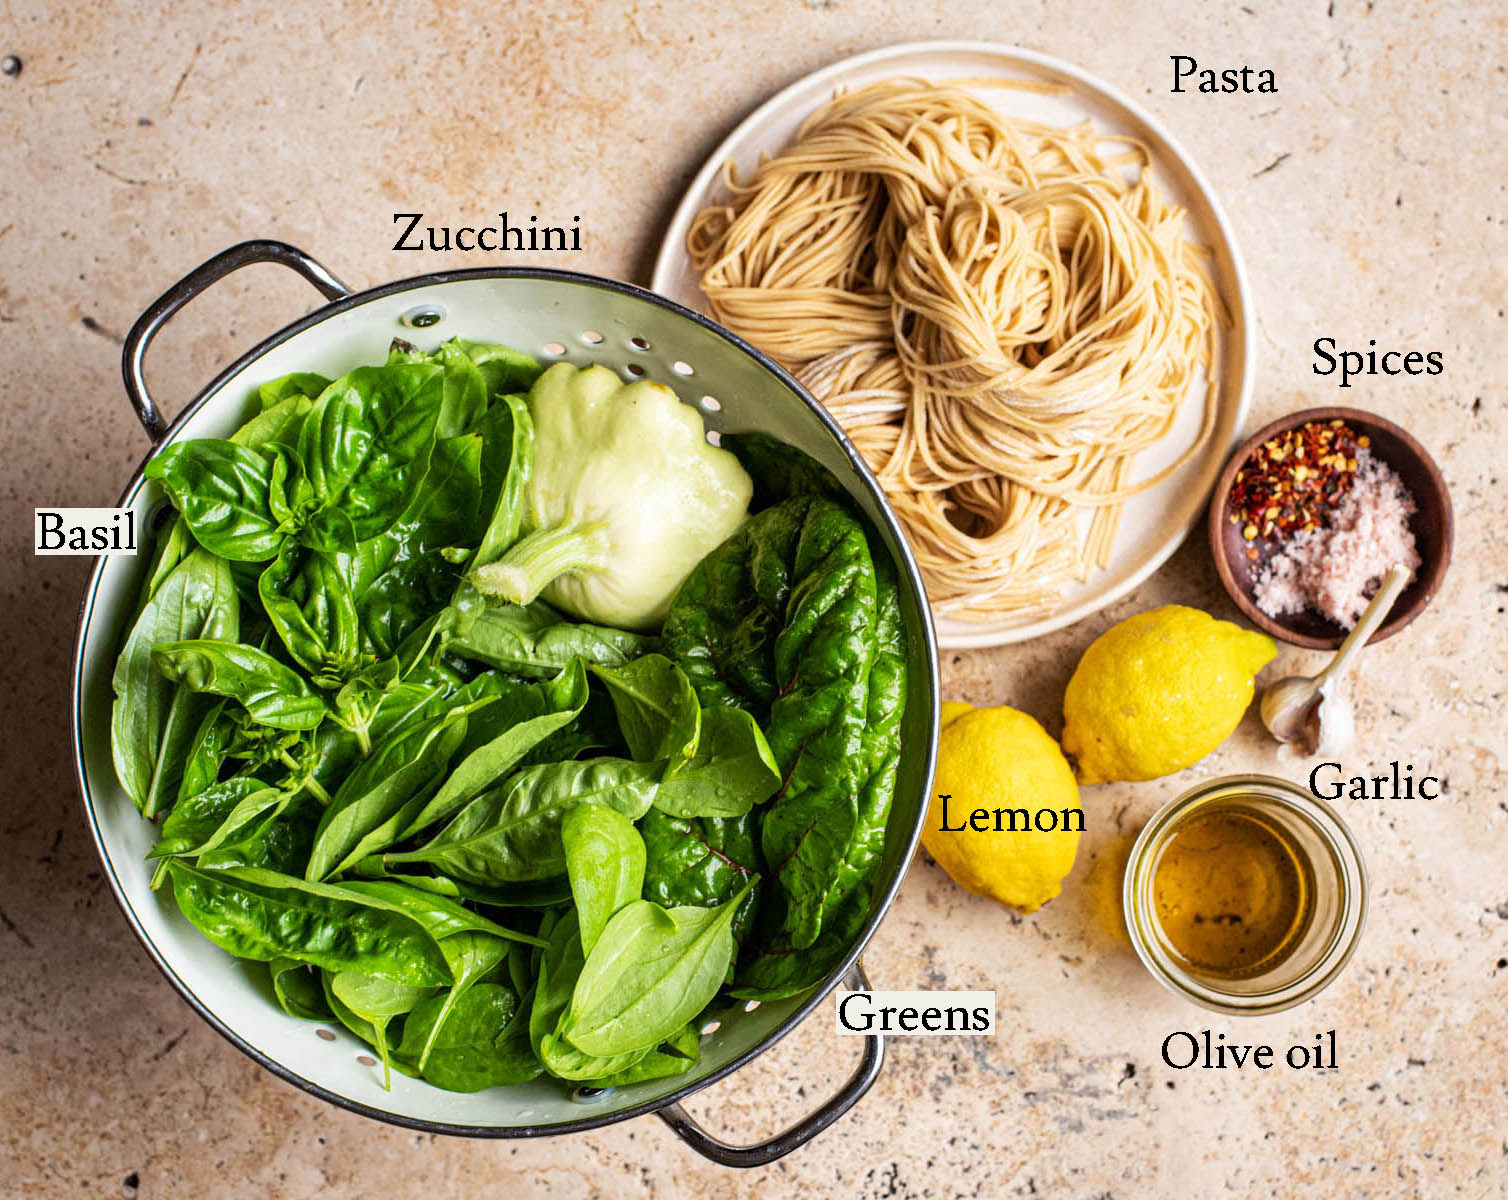 Green pasta ingredients with labels.